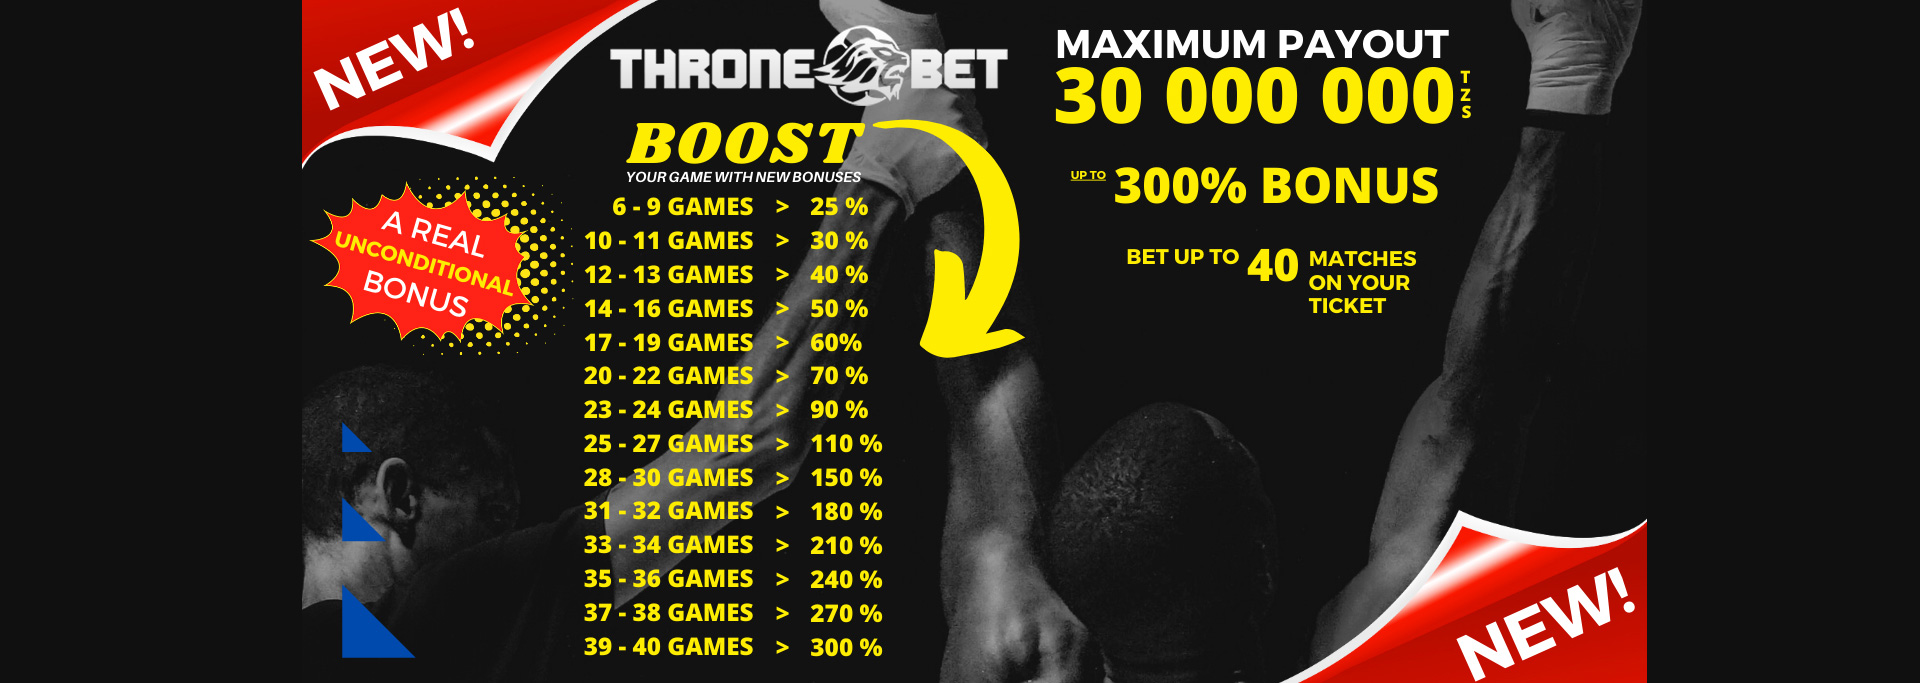 Image for Throne Bet Boost